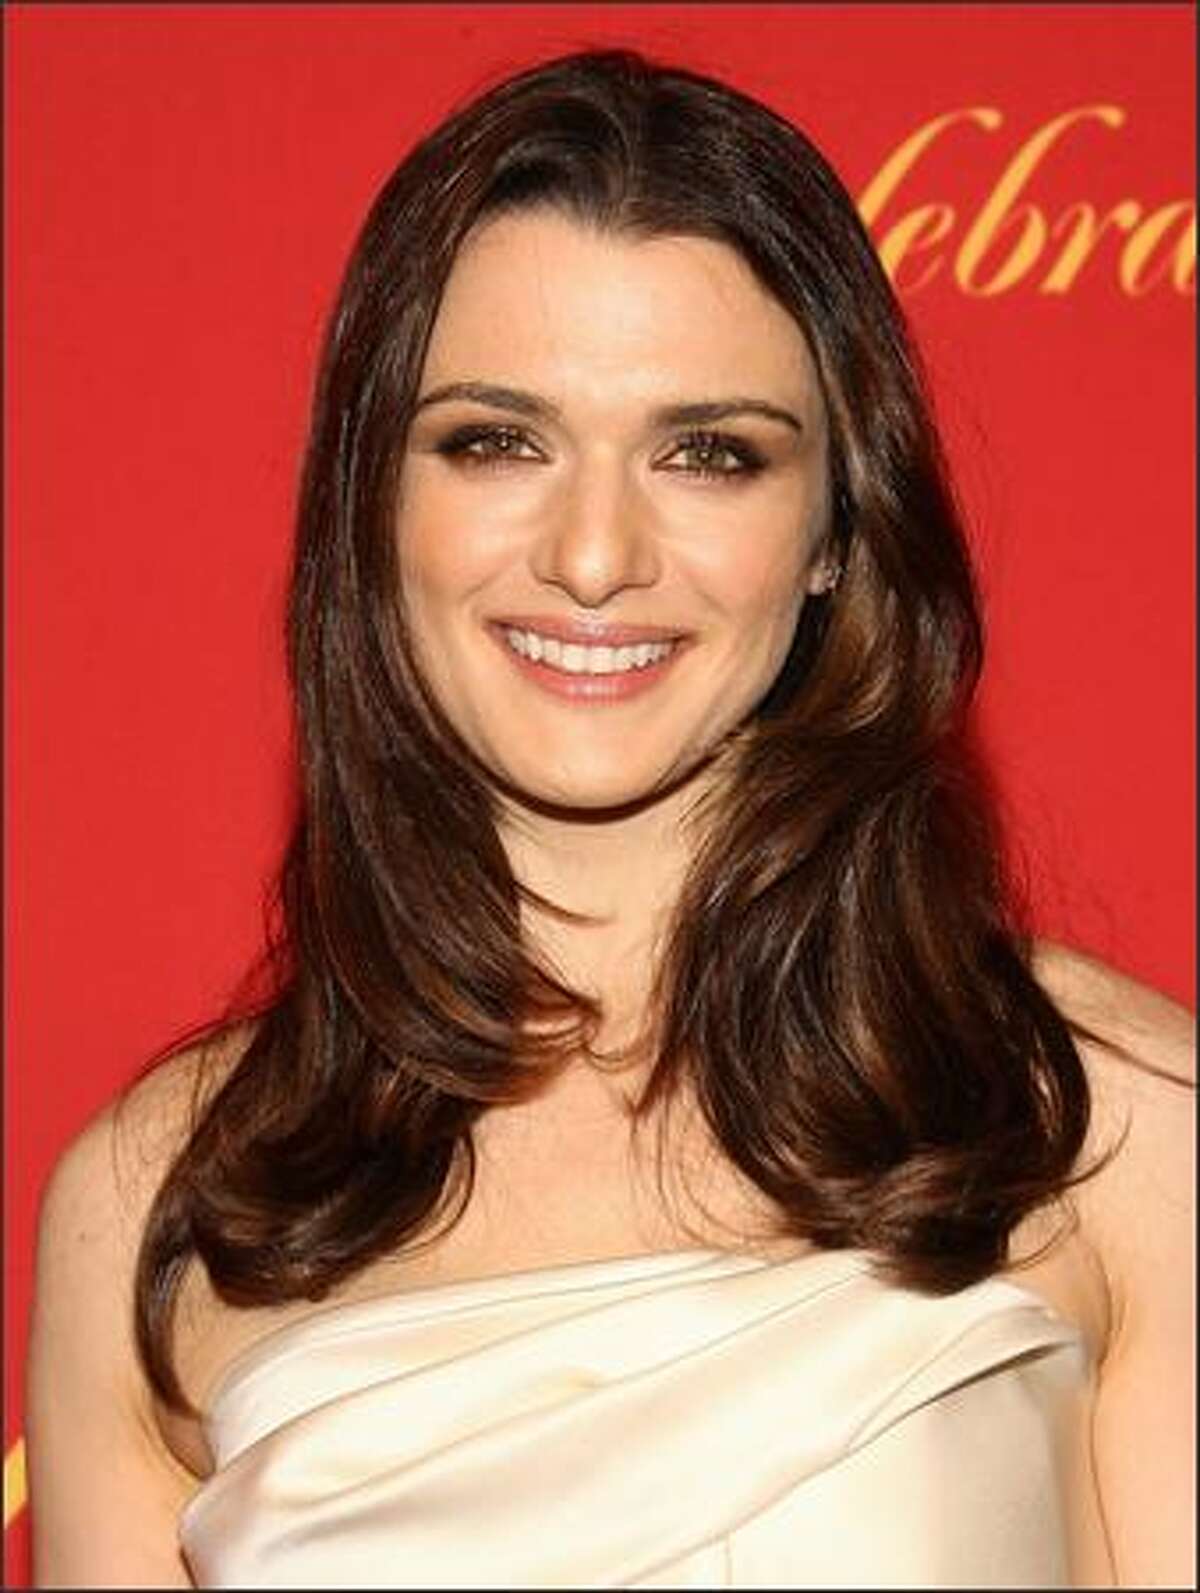 Actress Rachel Weisz attends the Cartier 100th Anniversary in America Celebration at Cartier Fifth Avenue Mansion in New York City.